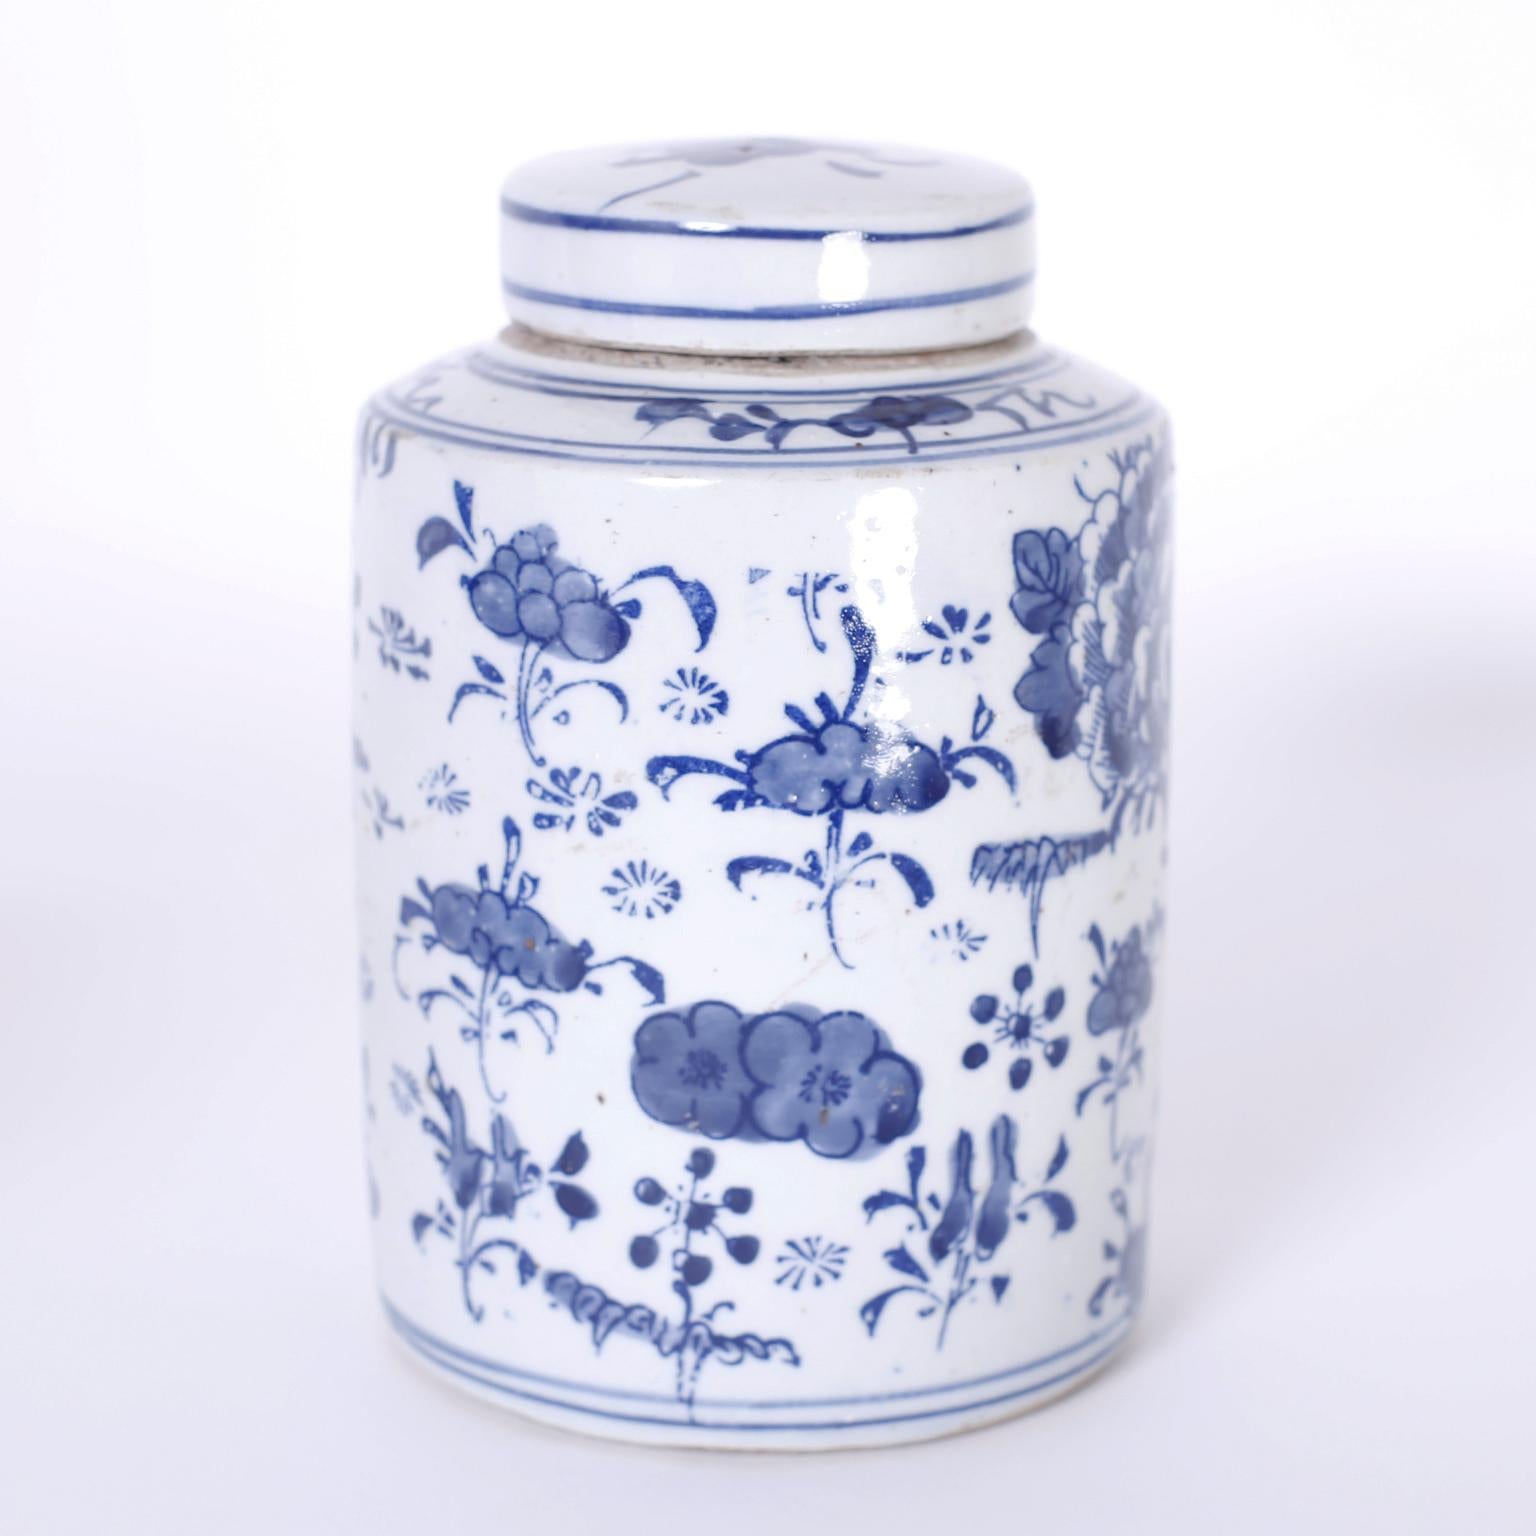 Hand-Painted Pair of Blue and White Porcelain Tea Caddies or Canisters